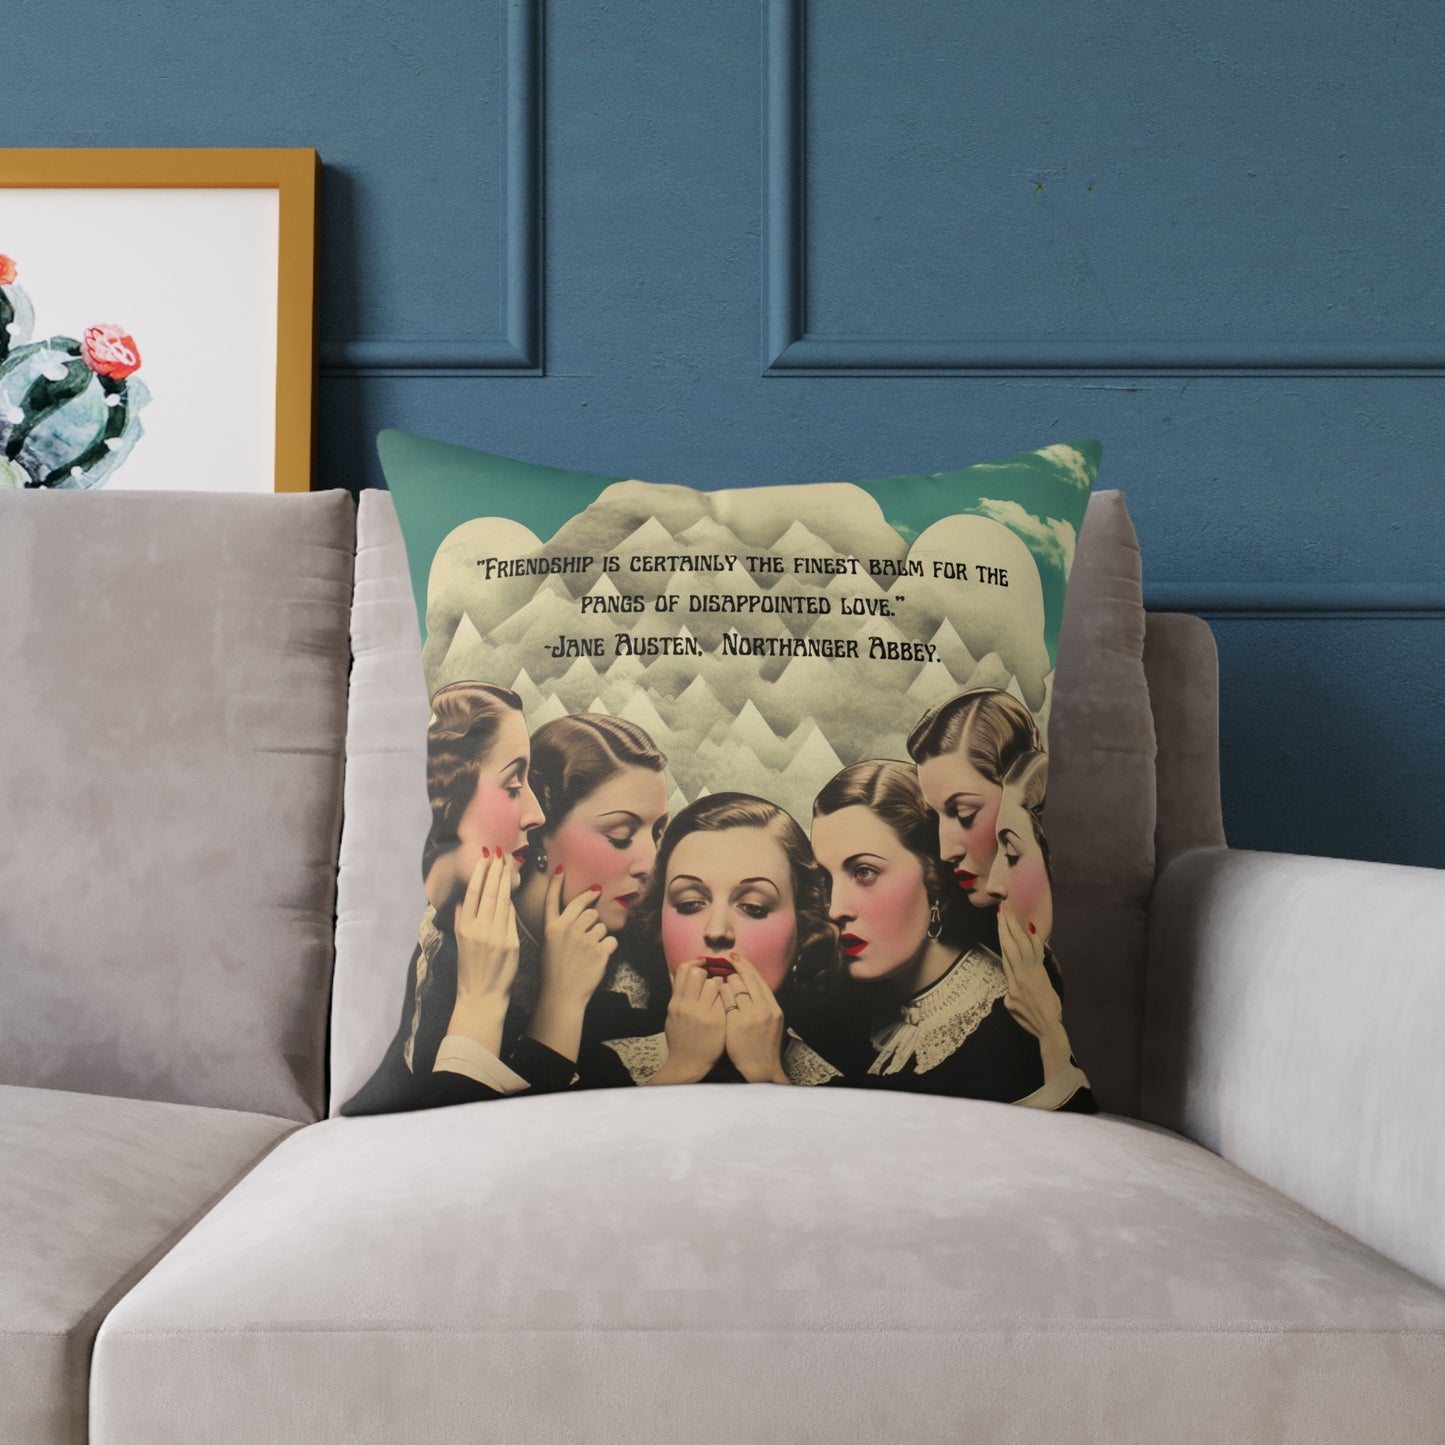 "Friendship Balm" from Northanger Abbey, by Jane Austen quote, Luxury Cushion